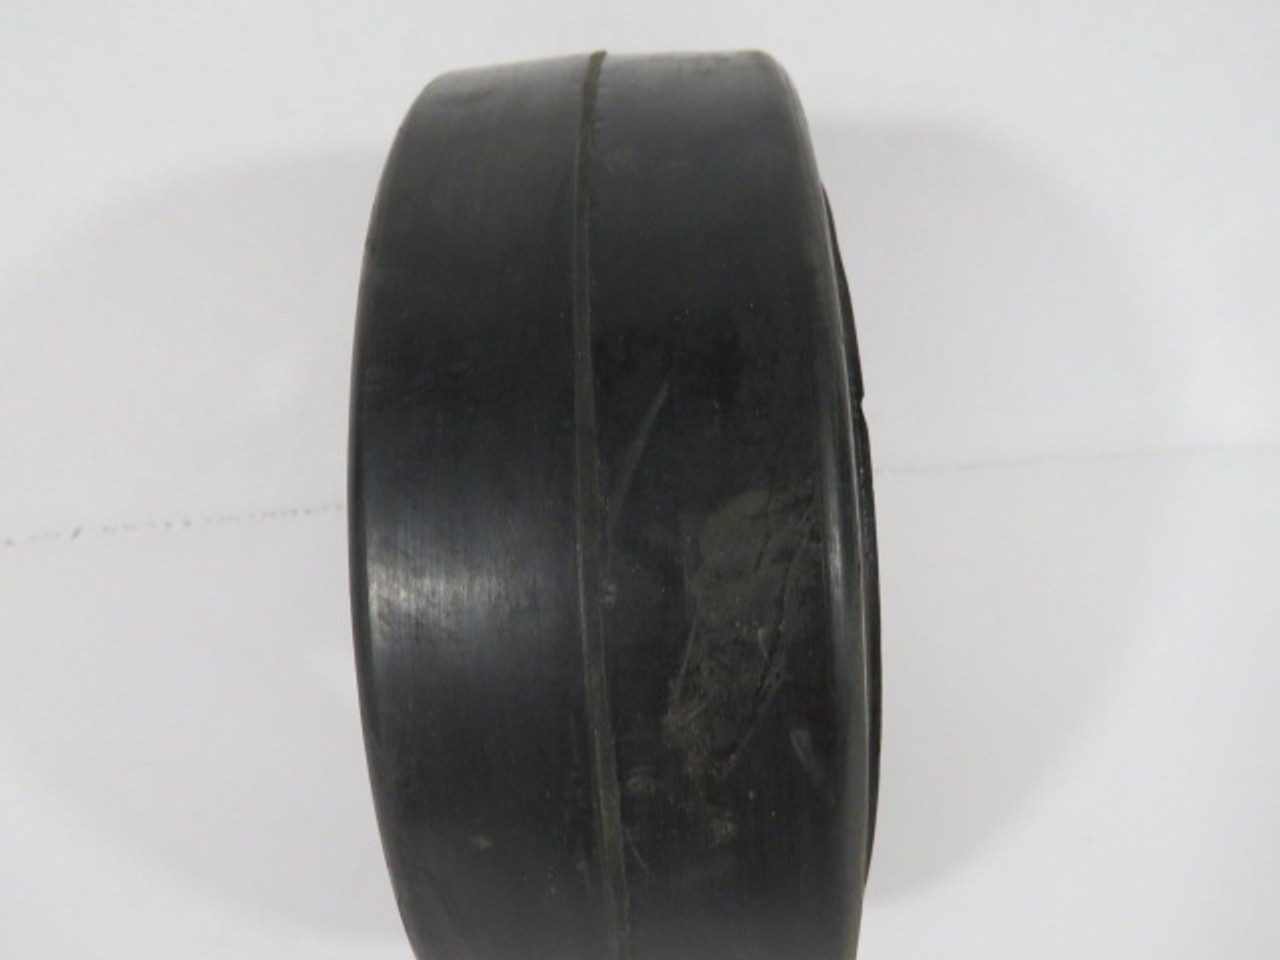 Algood 7508-A53J-MR-RB 8X3X3 1X3-1/4 Moldon Rubber Caster Wheel USED